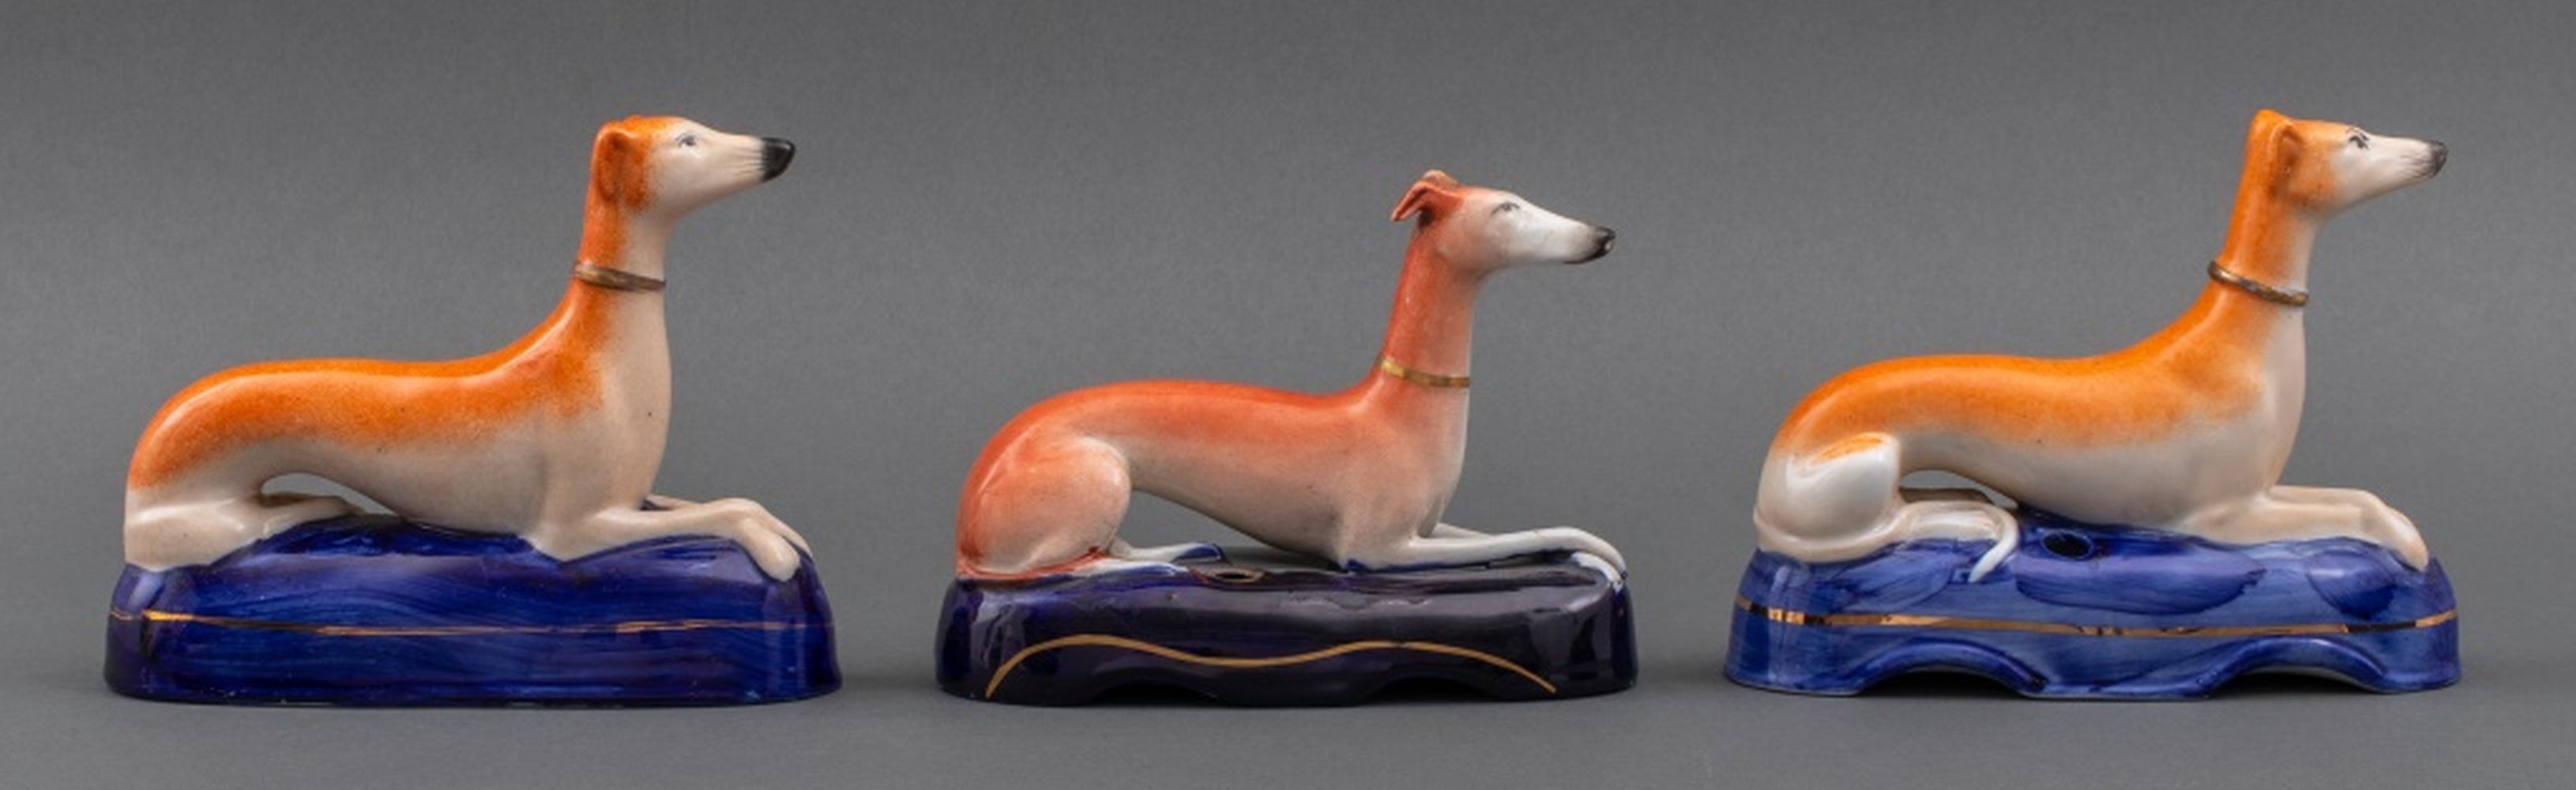 GROUP OF STAFFORDSHIRE STYLE WHIPPETS  3608bb